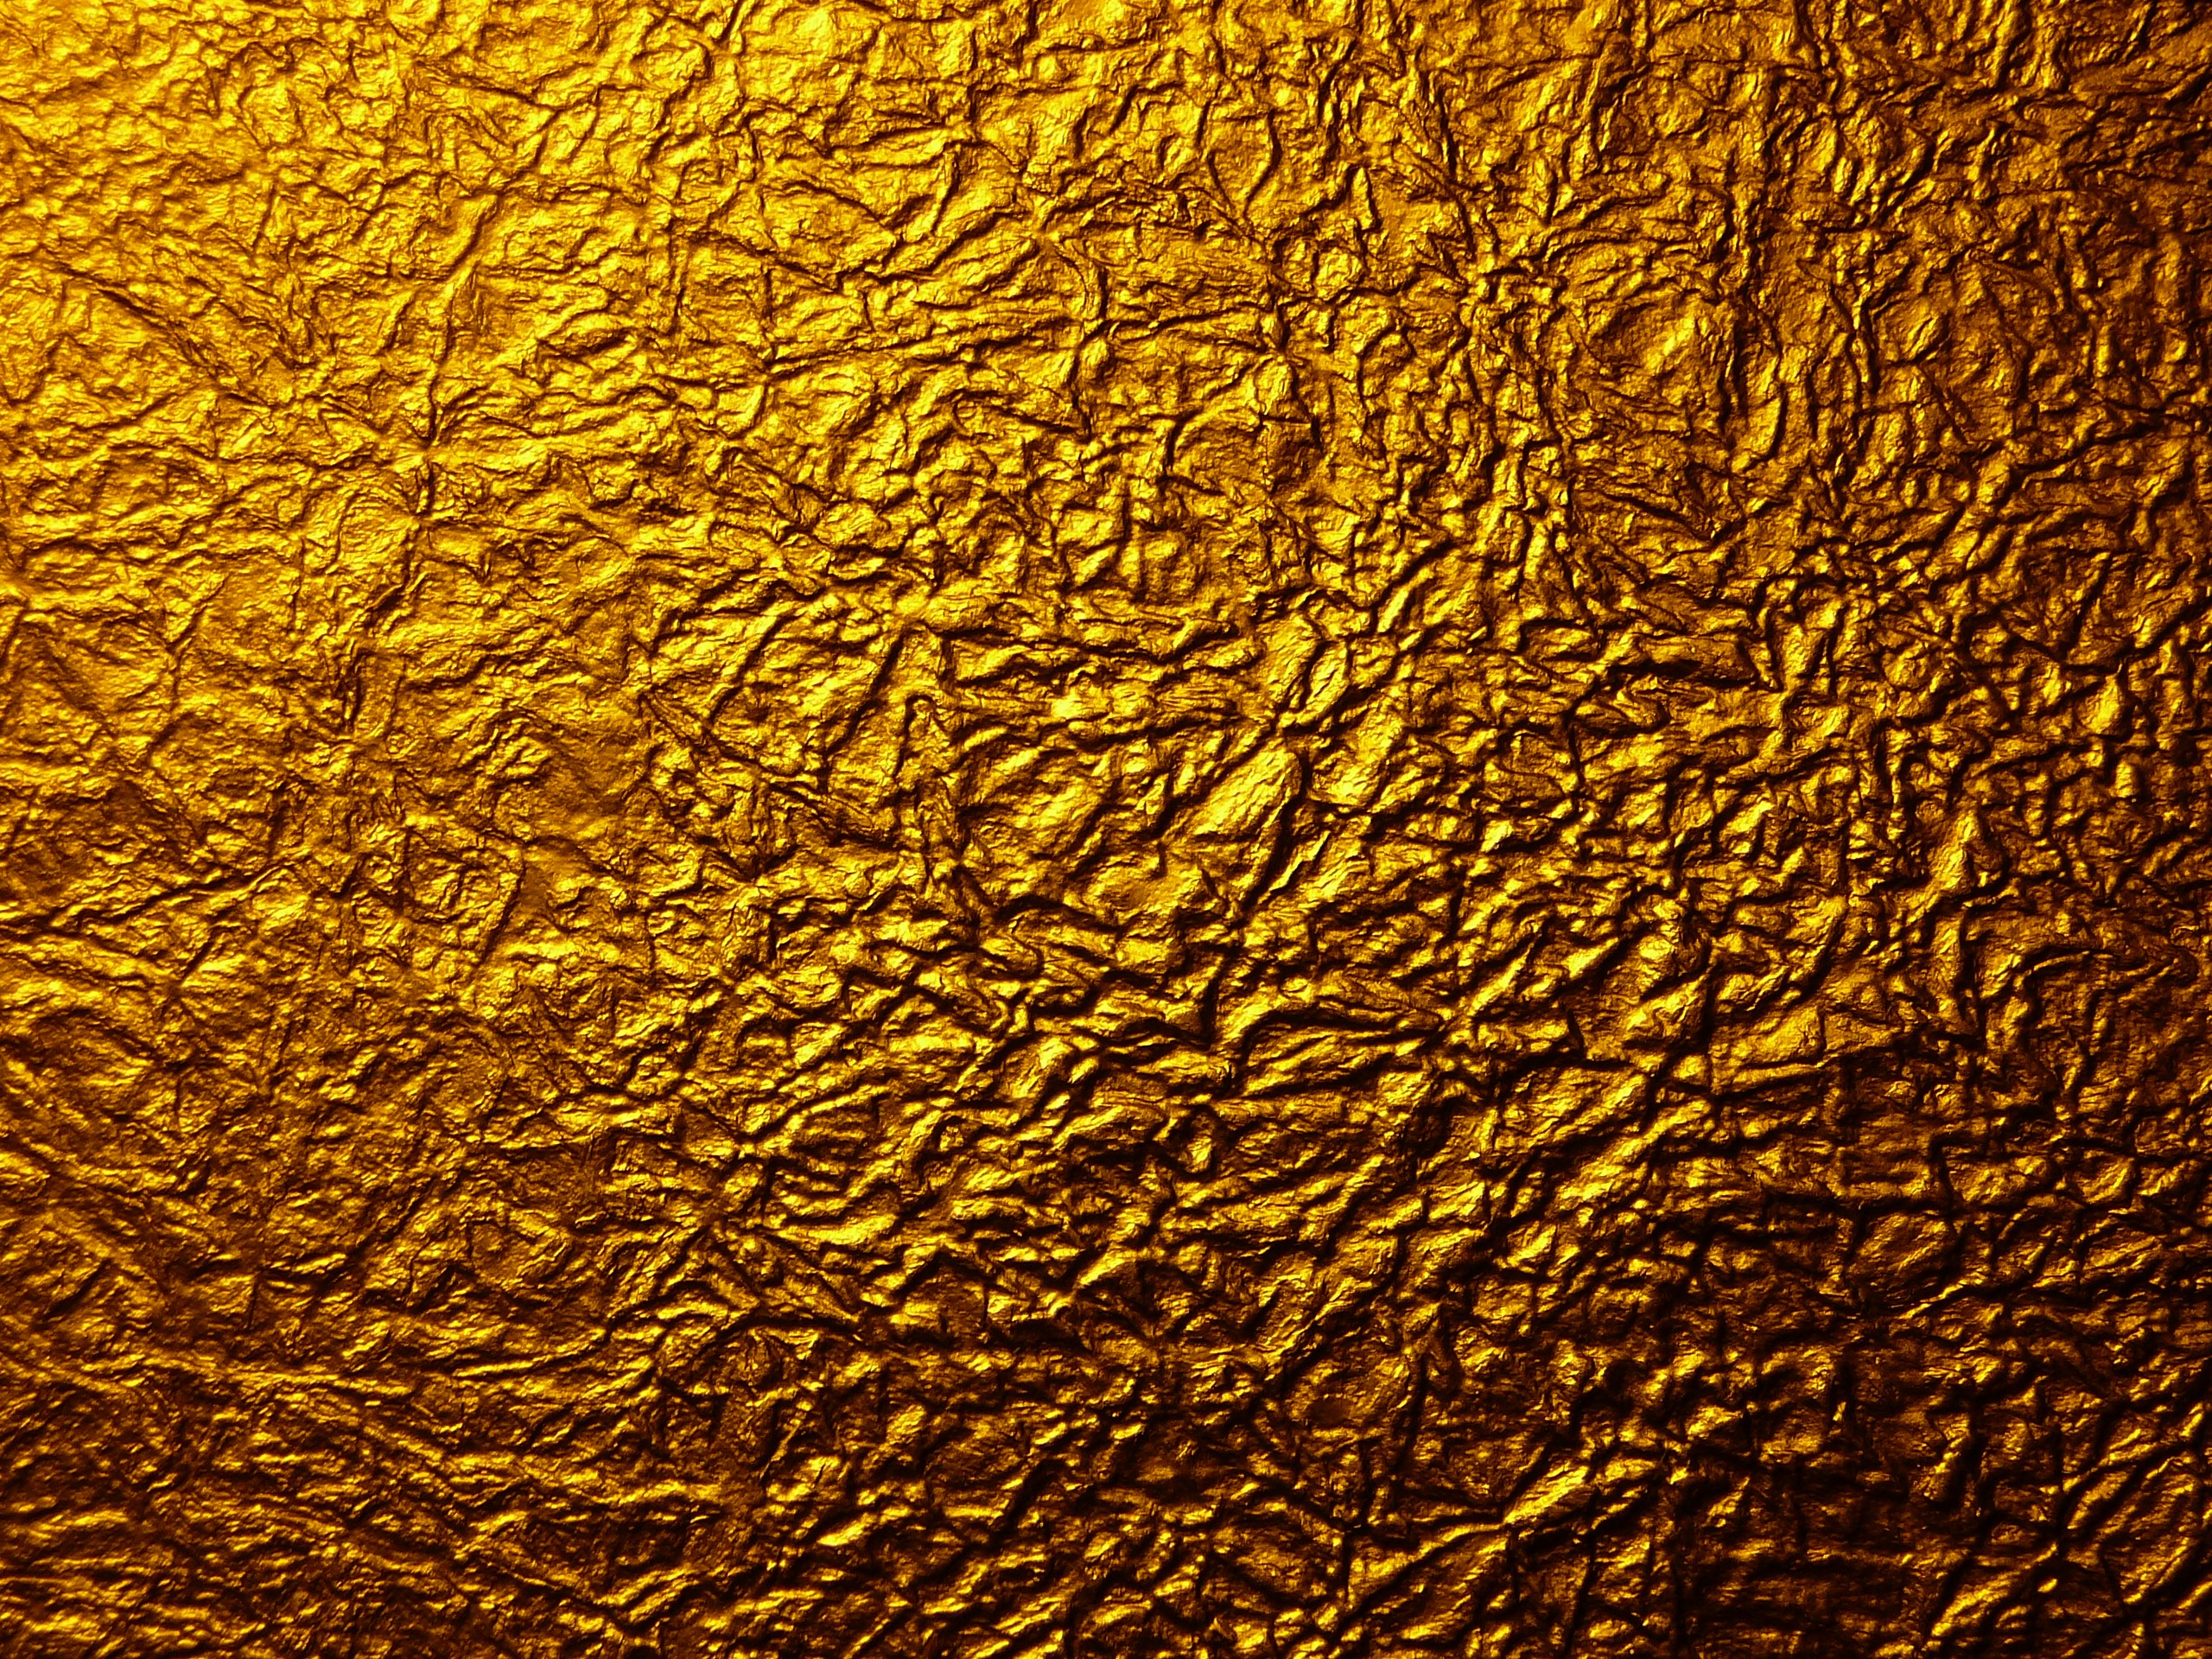  Gold  Foil background   Download free stunning HD  